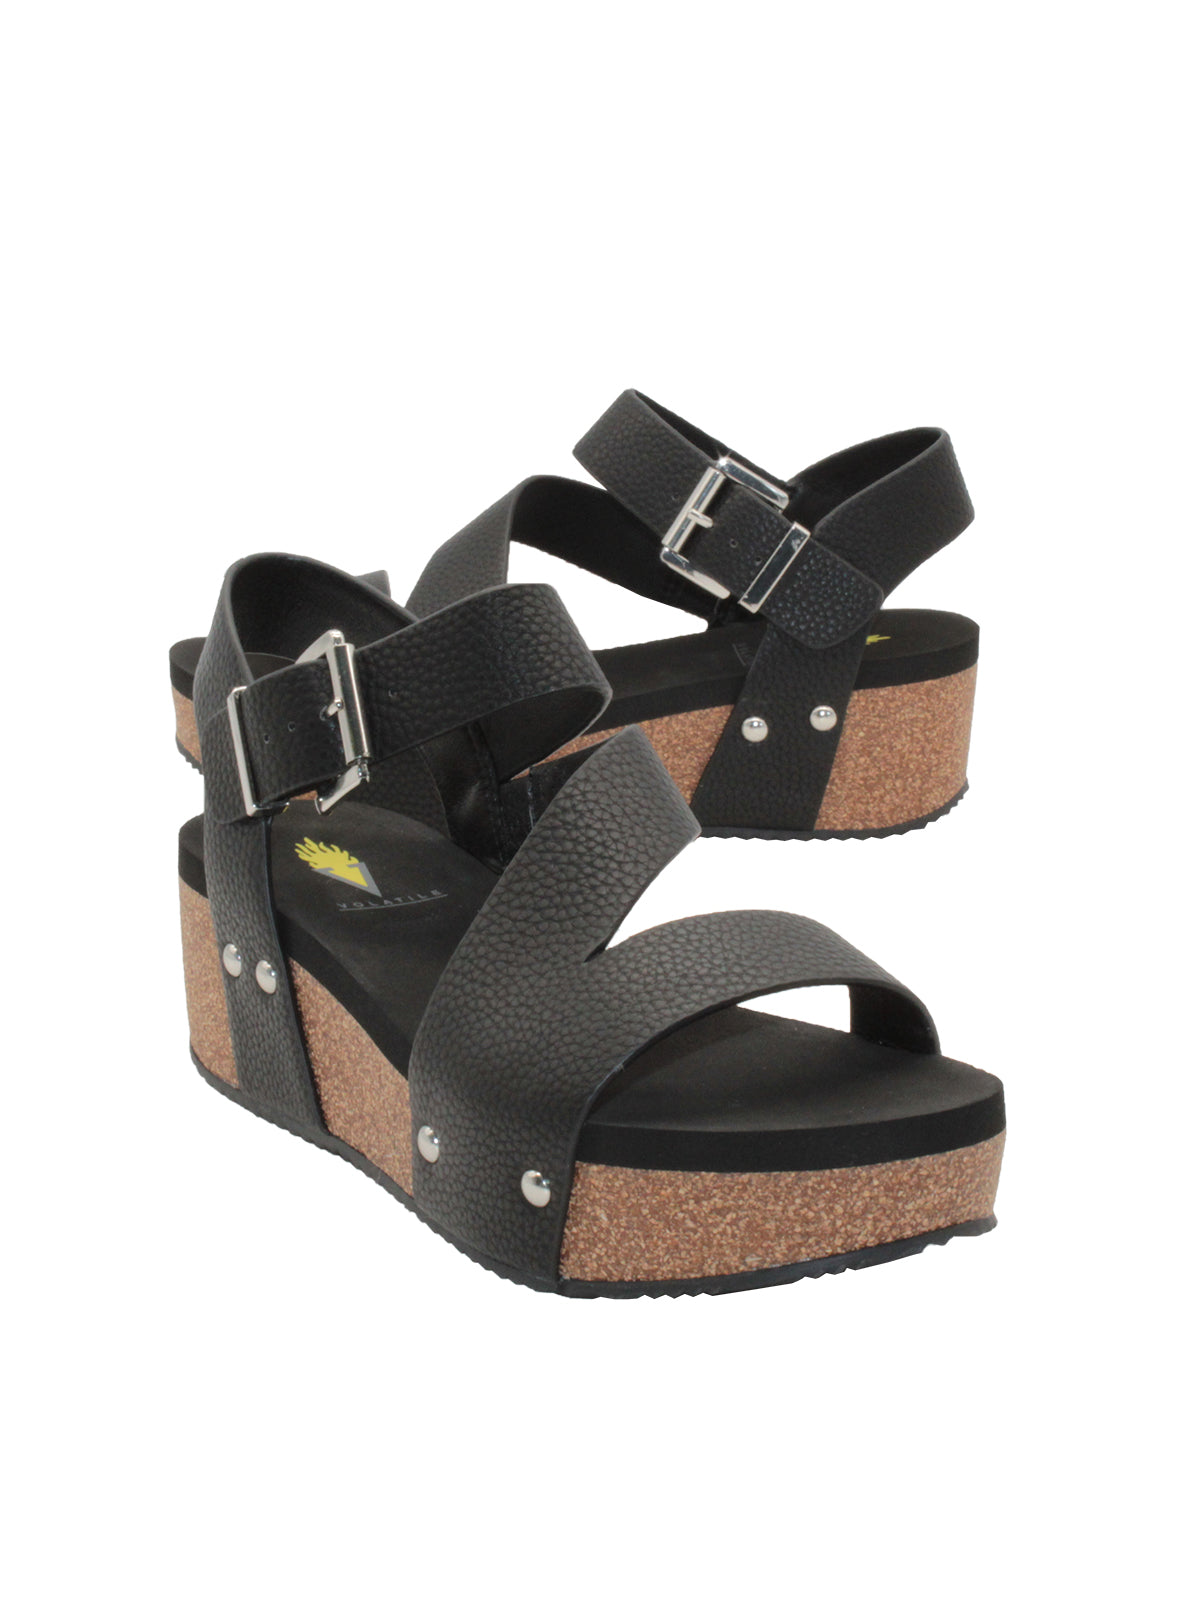 Vegan leather or heavy canvas asymmetrical upper Synthetic lining Adjustable metal buckle and metal clog studs Asymmetrical sandal with back strap Ultra comfort EVA insole Cork wedge Rubber traction outsole Approx. 2” heel height black 3/4 angle